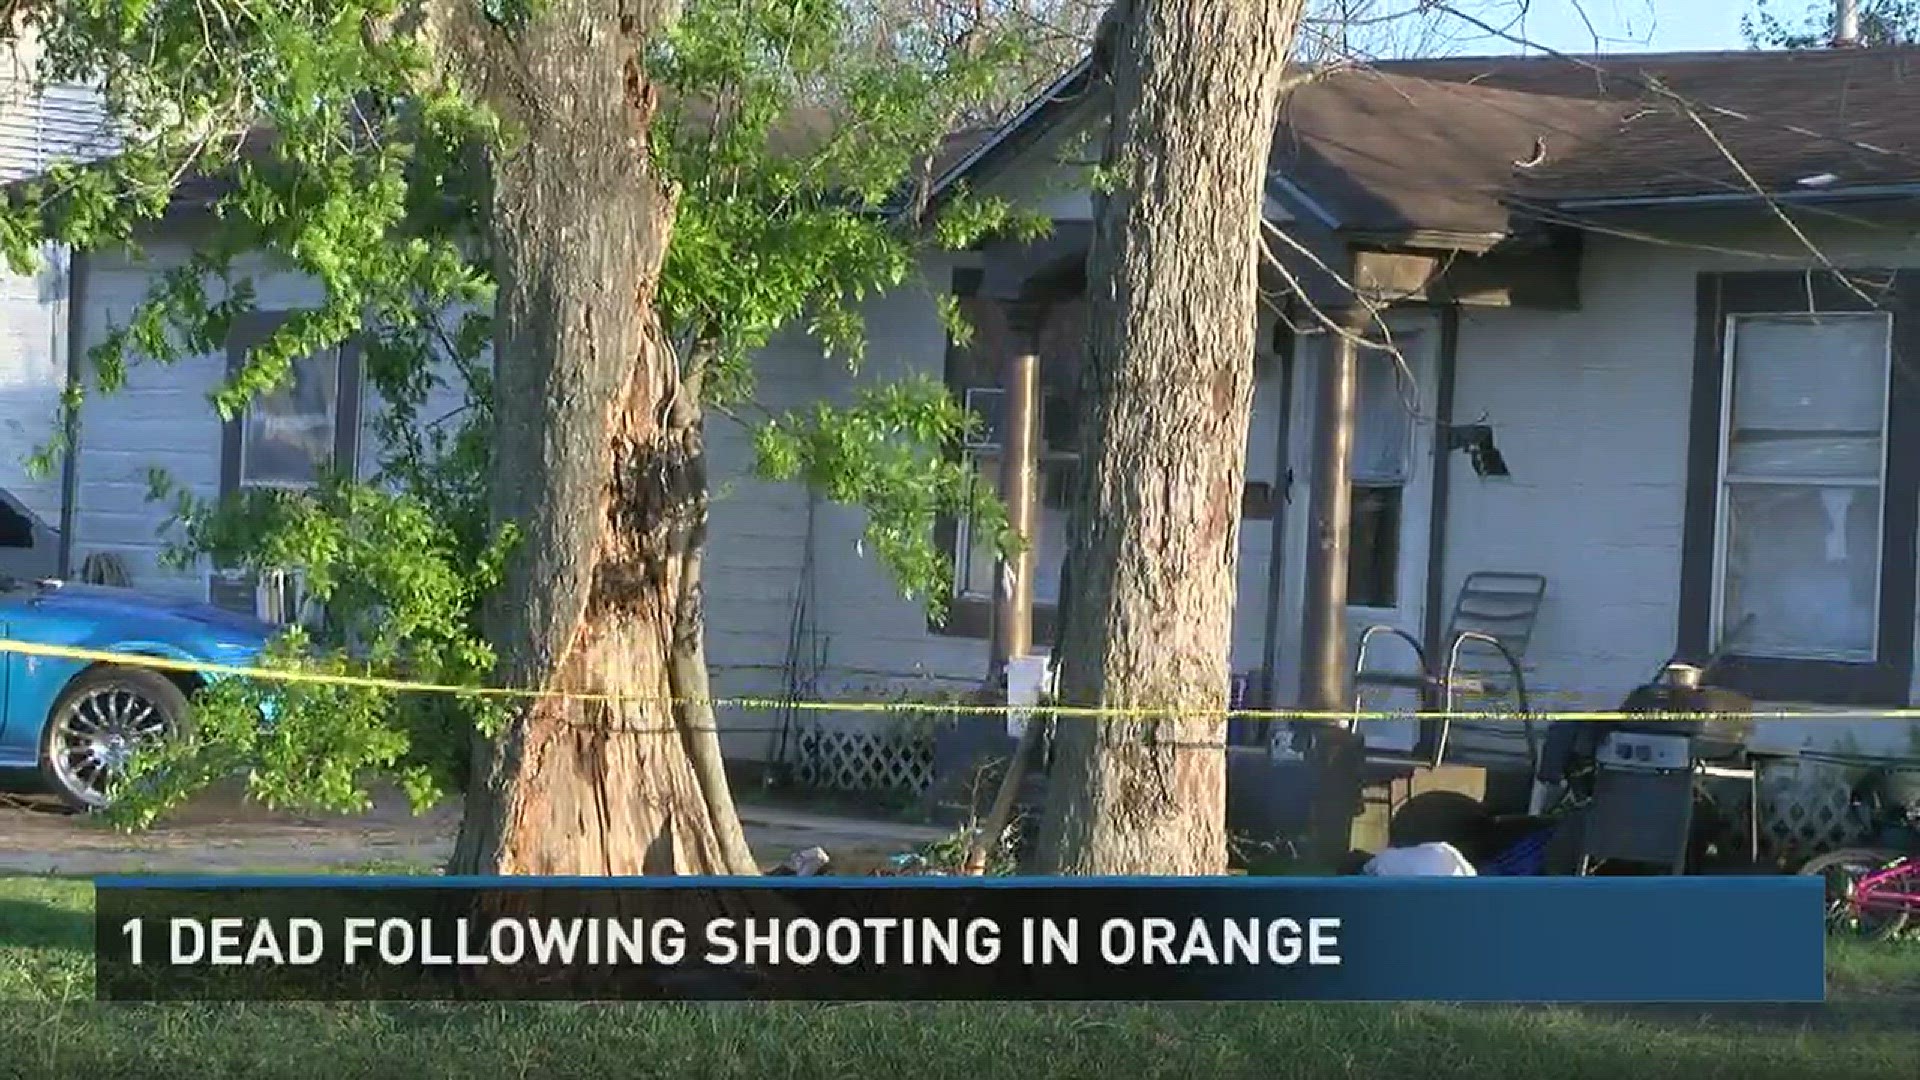 City of Orange Police officers are investigating a shooting in the 1500 block of Main Street. When officers arrived, they discovered a female victim had been shot in the upper back.